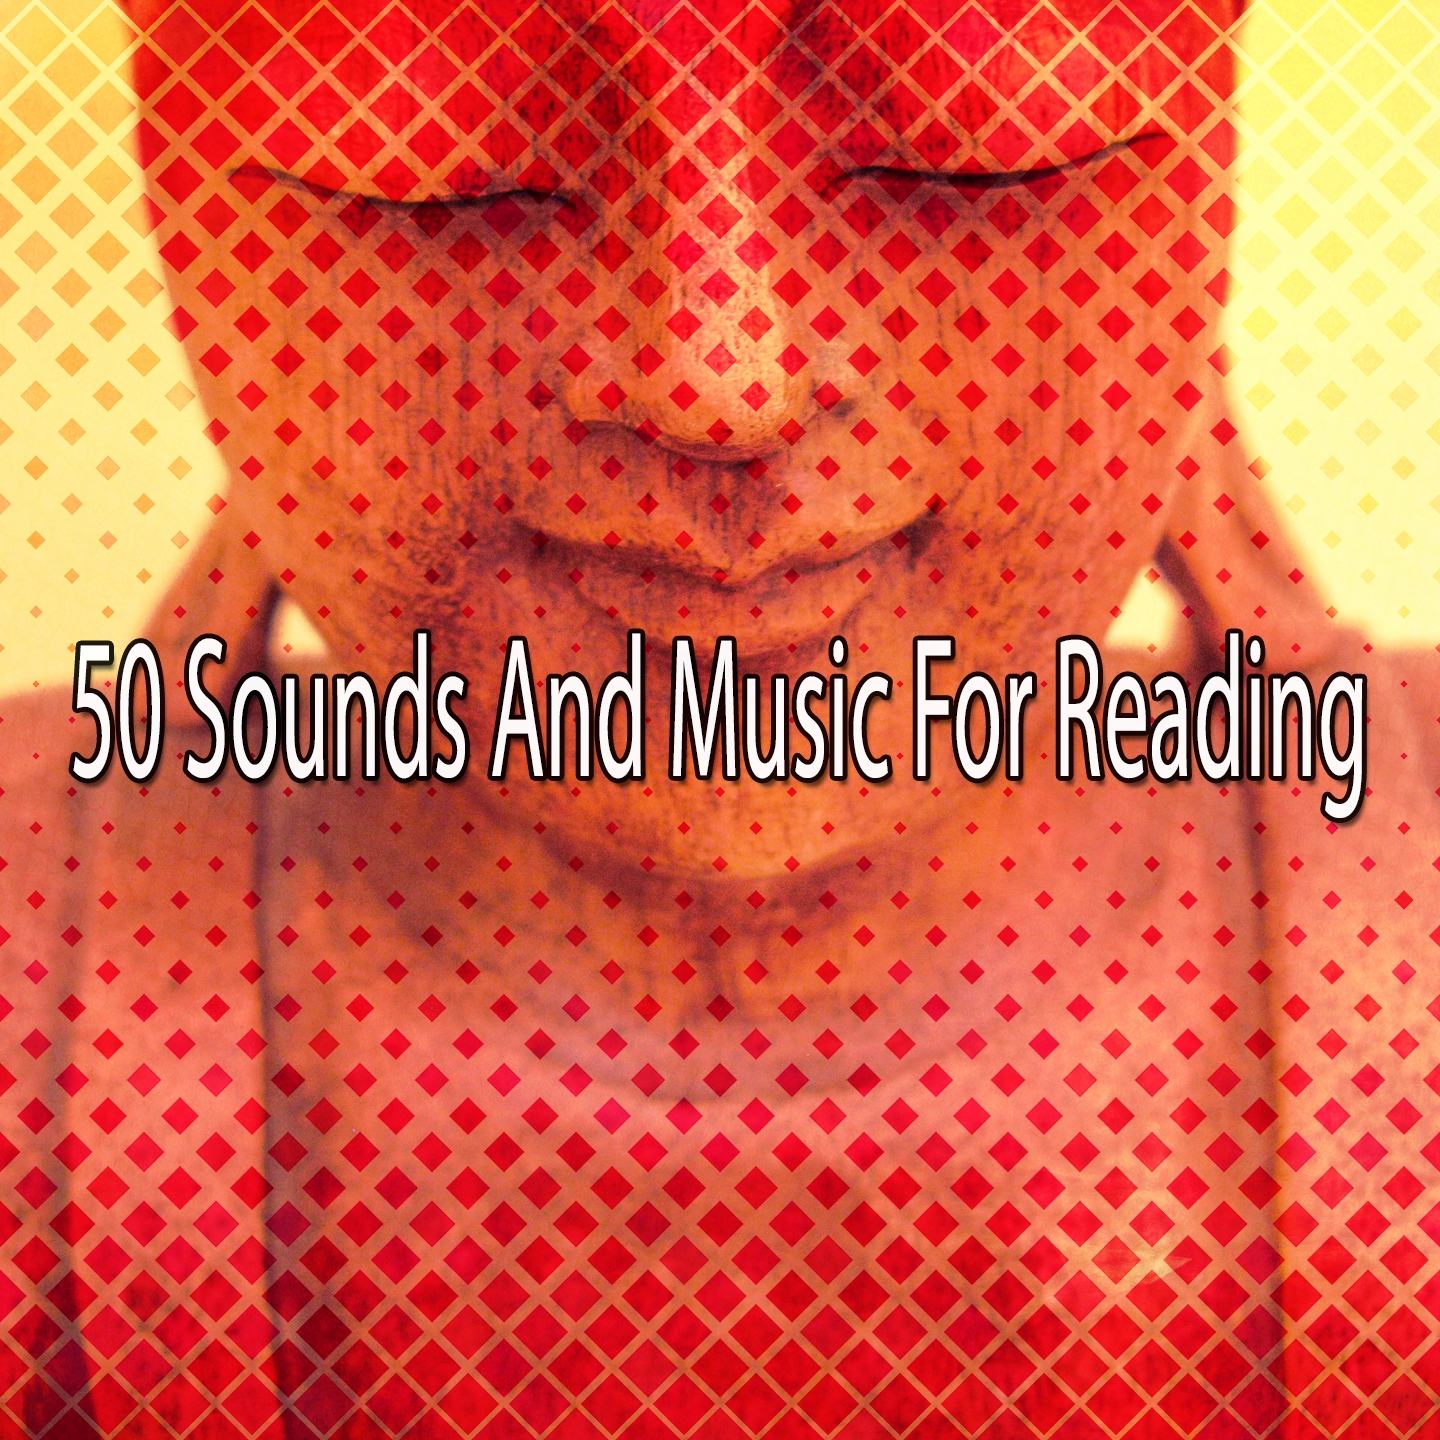 50 Sounds And Music For Reading